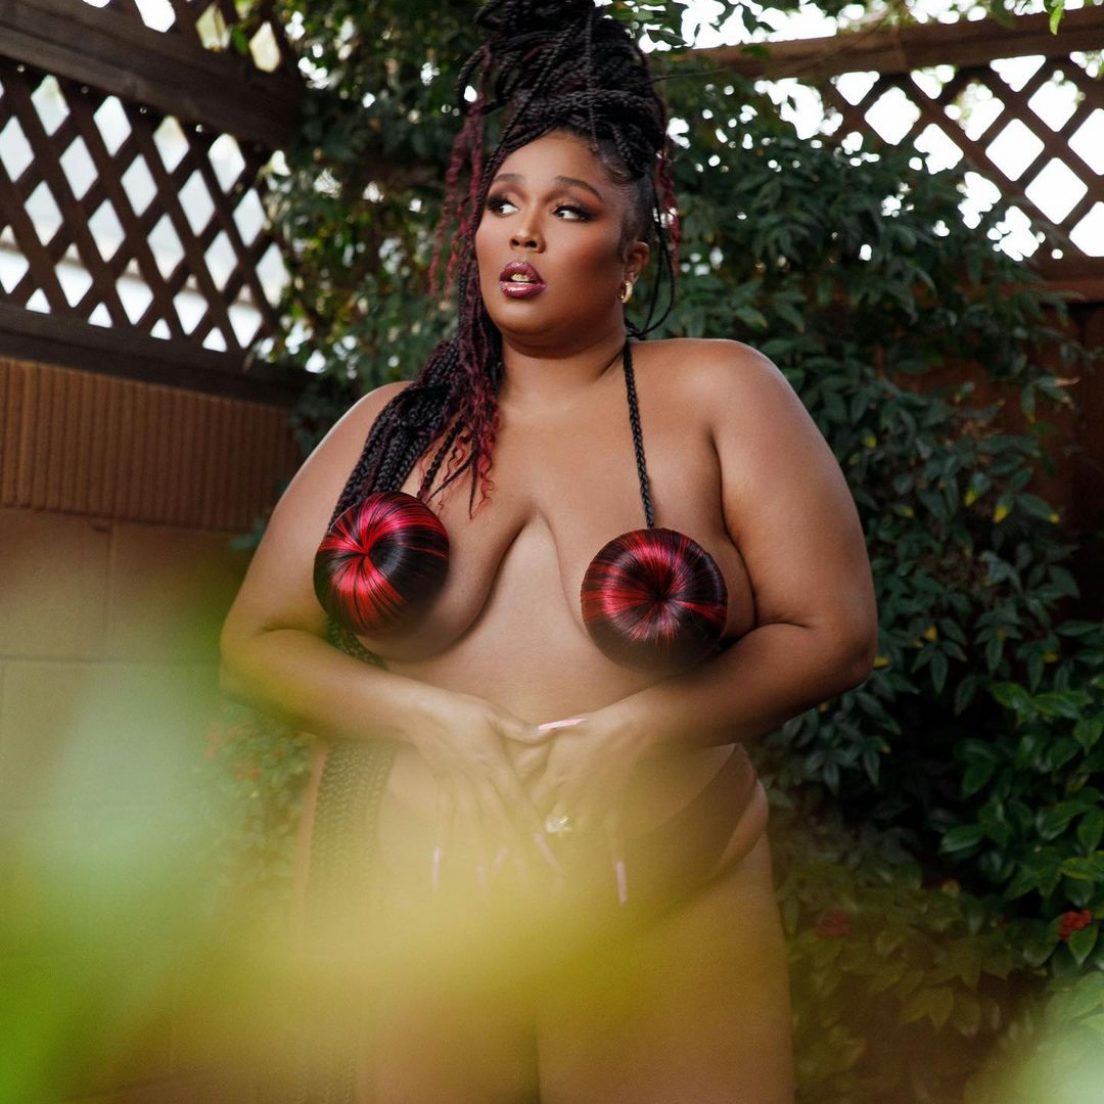 It’s Official - Lizzo Has The Best Bikini Collection.